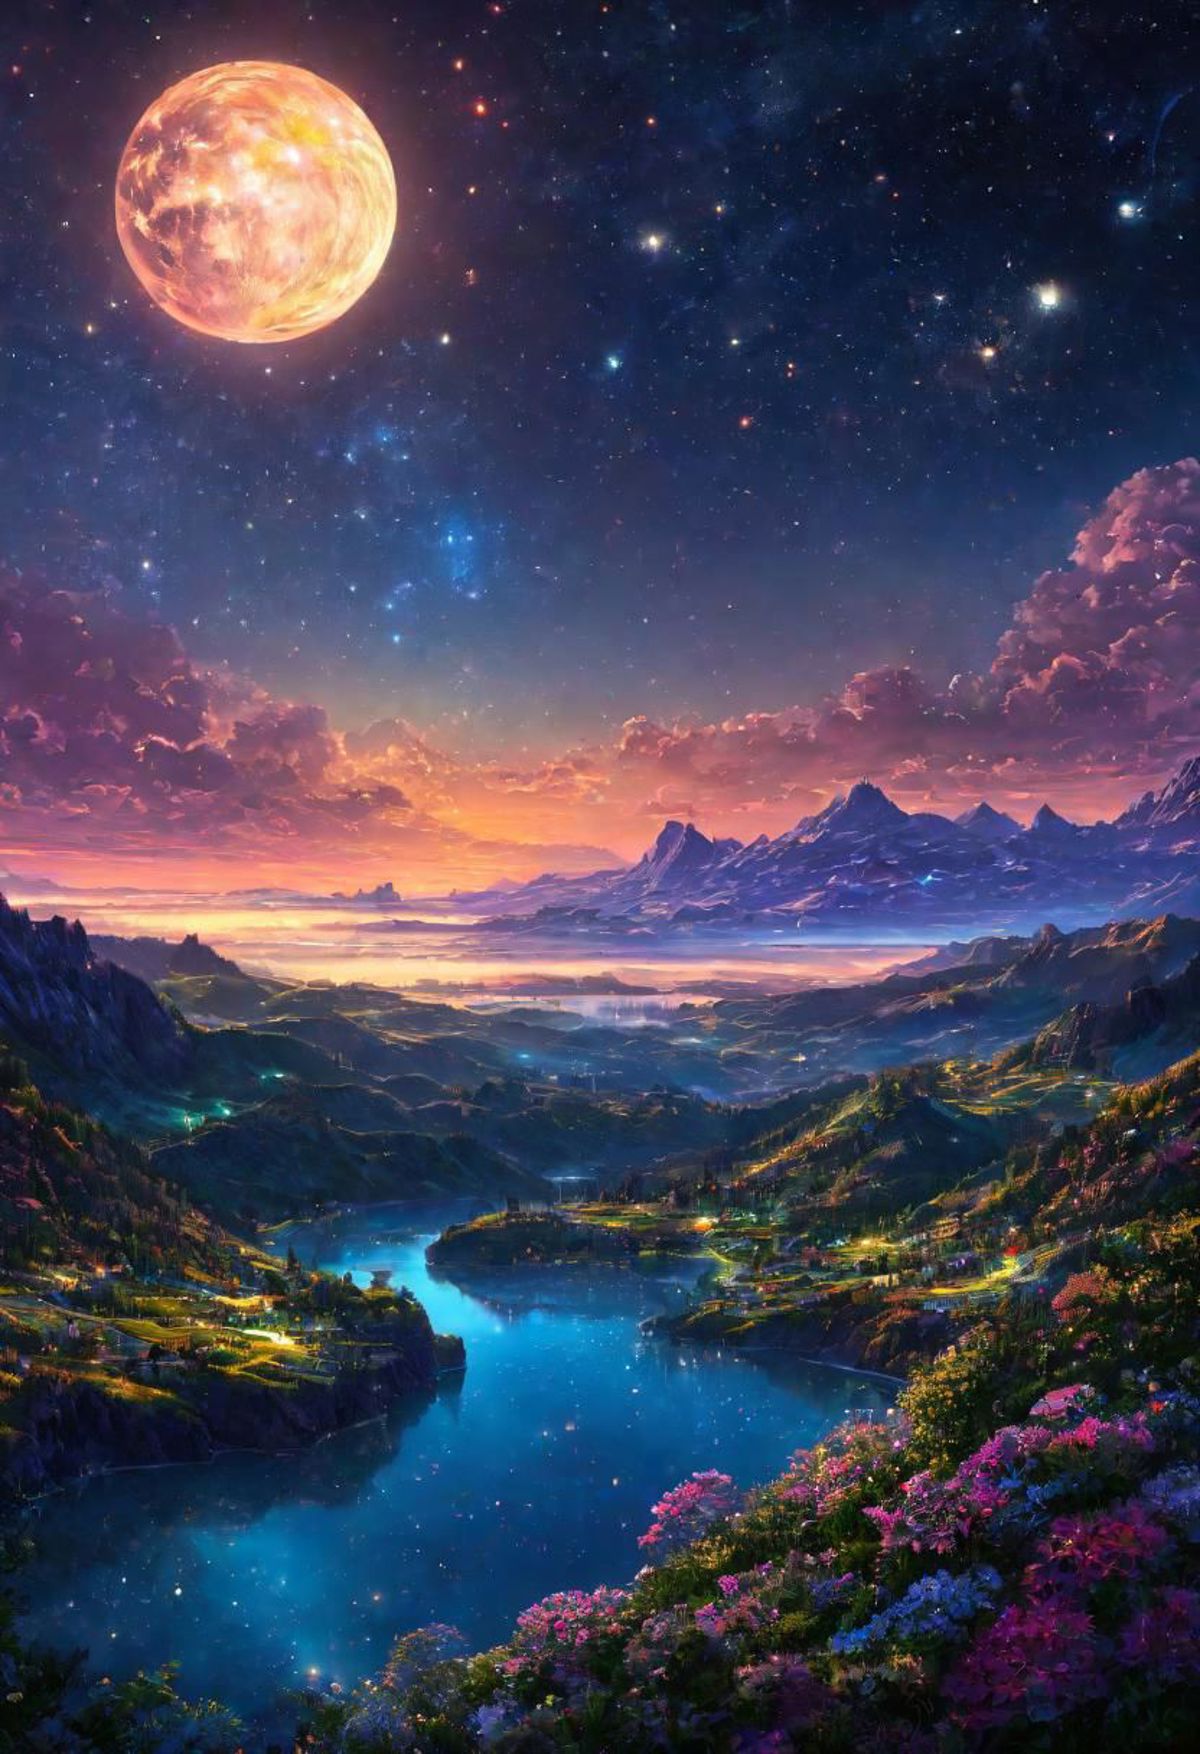 A Nighttime Painting of the Moon and Mountains with a River Flowing Through